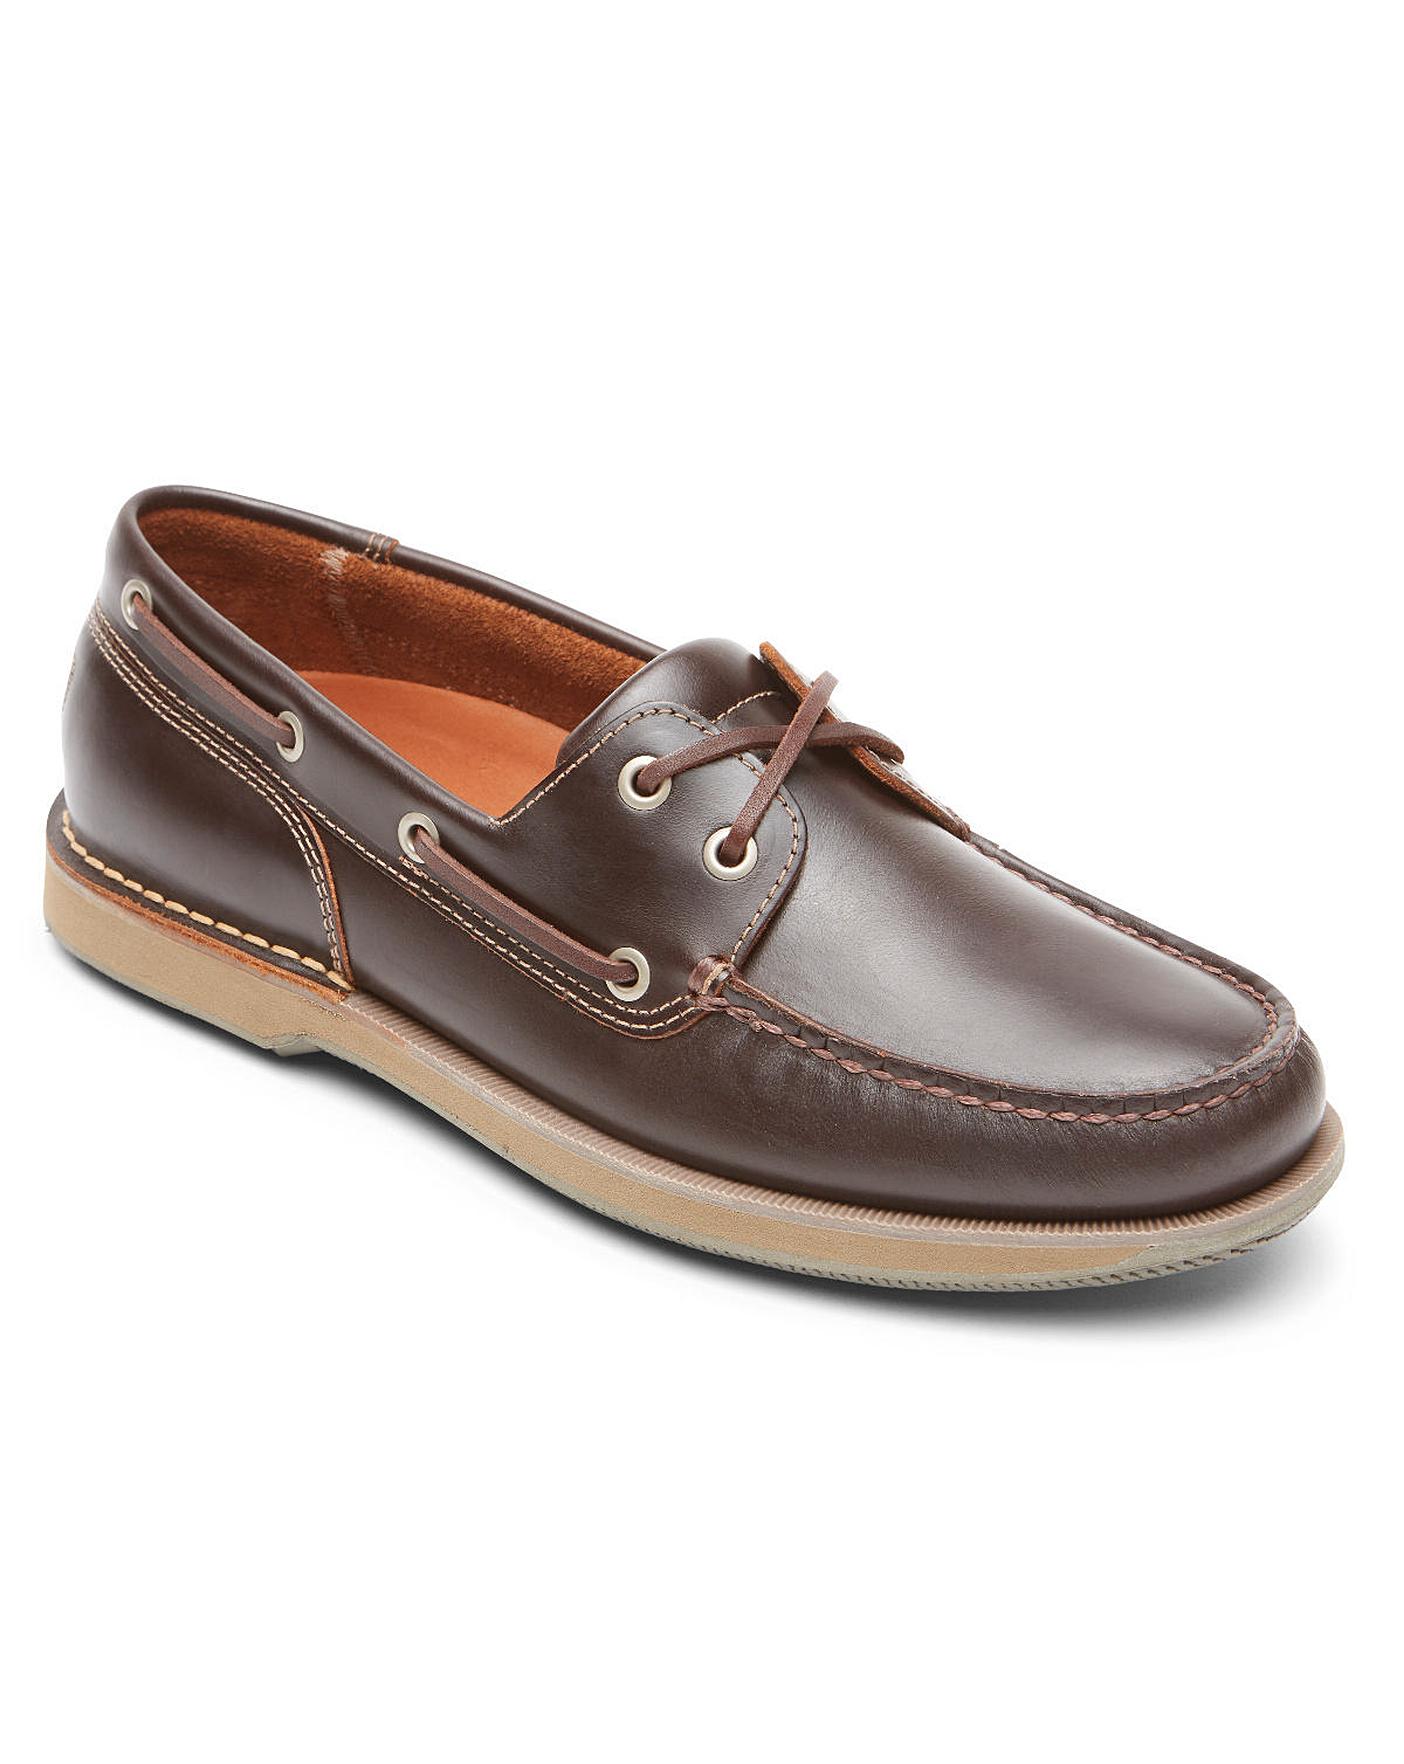 Perth Beeswax/Dark Brown Leather Shoes